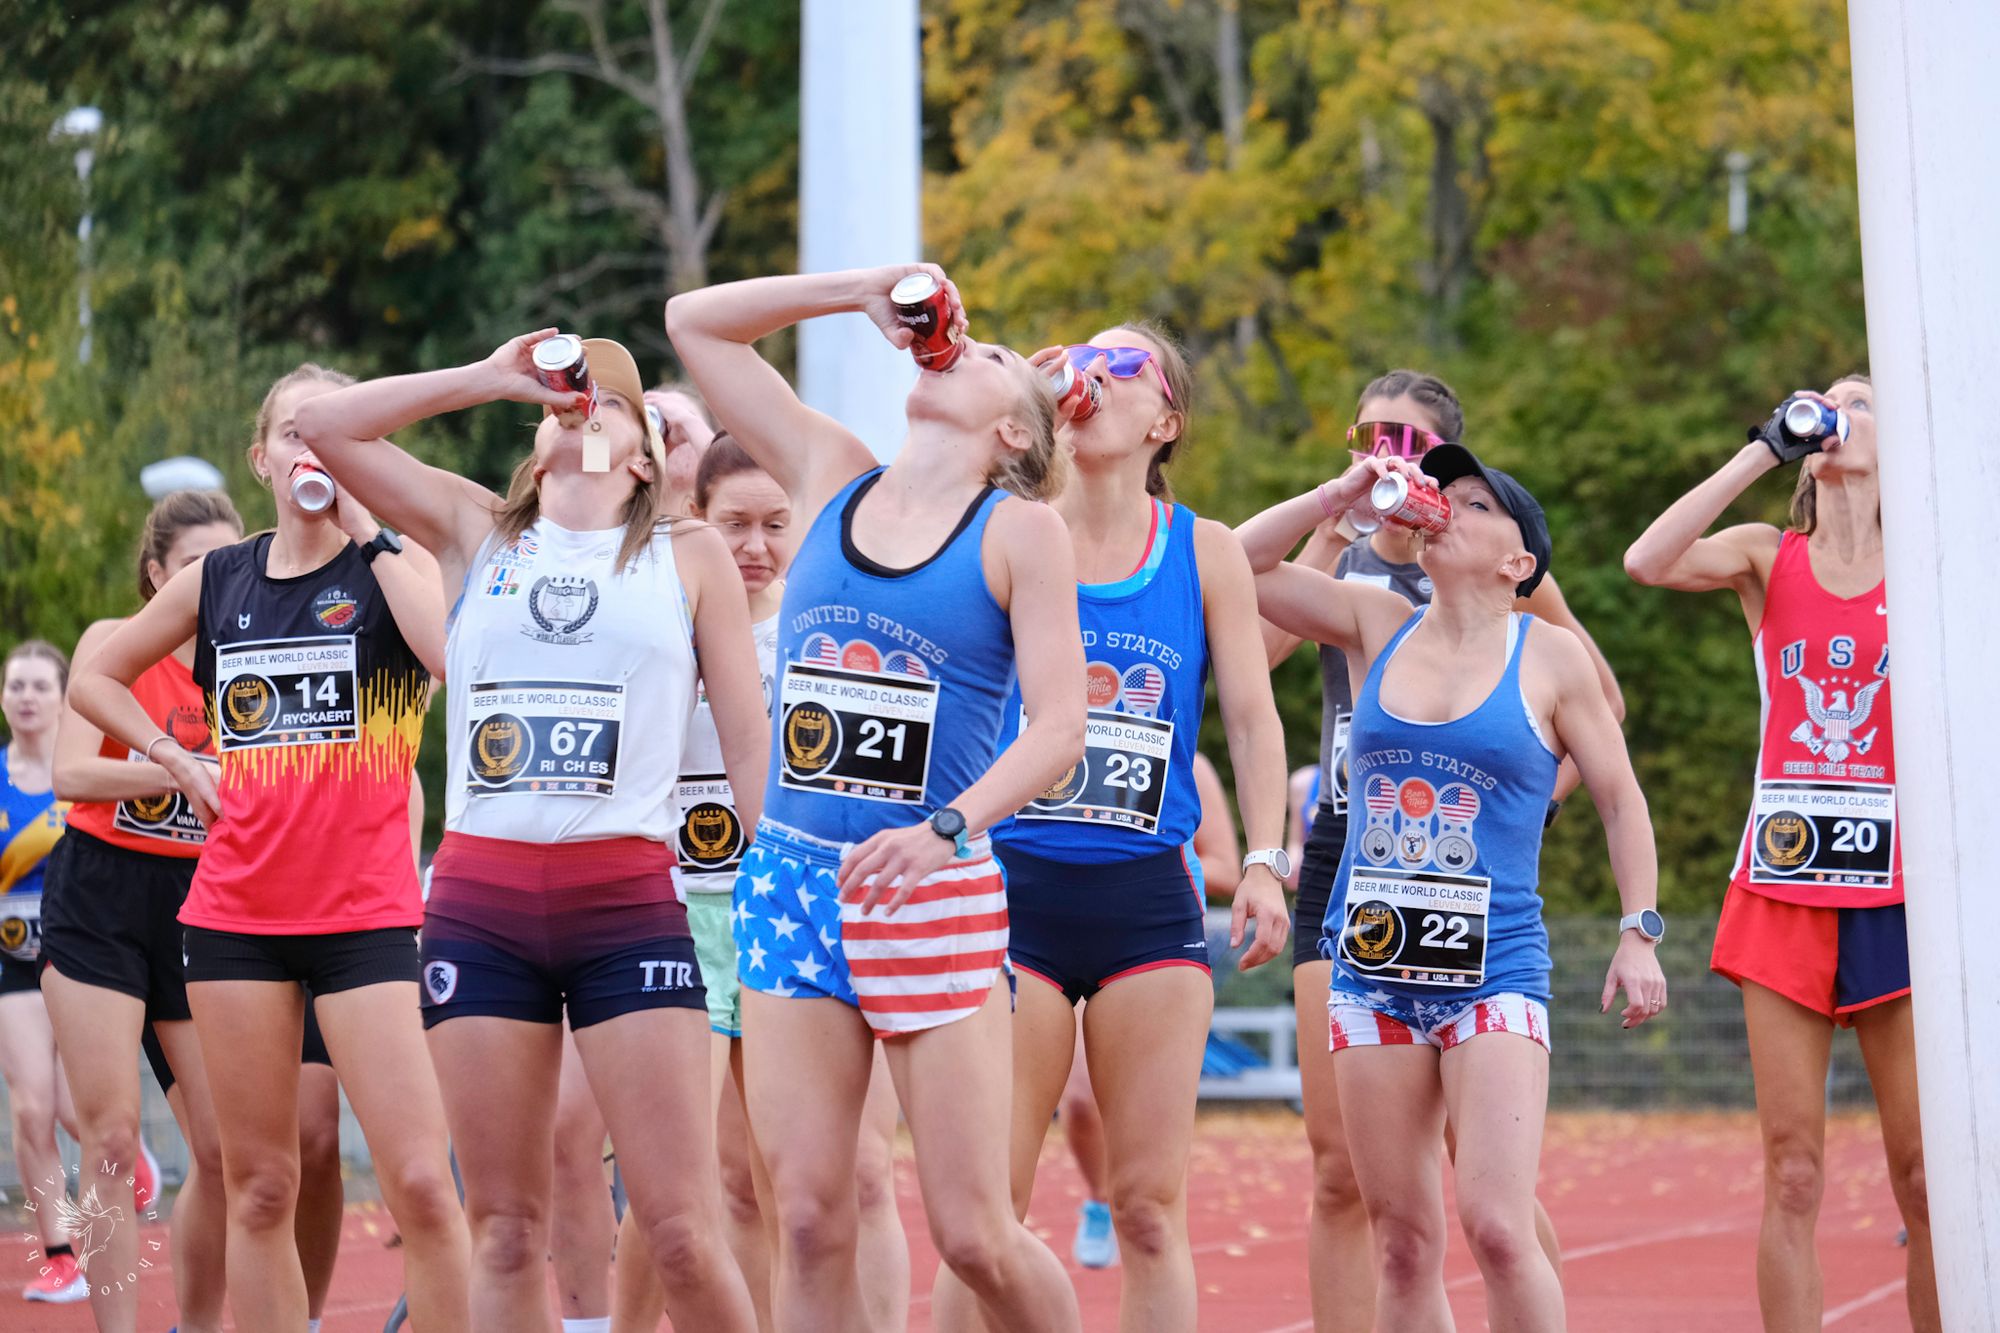 Chug Zone for the Women's Championship Race at the 2022 Beer Mile World Classic 